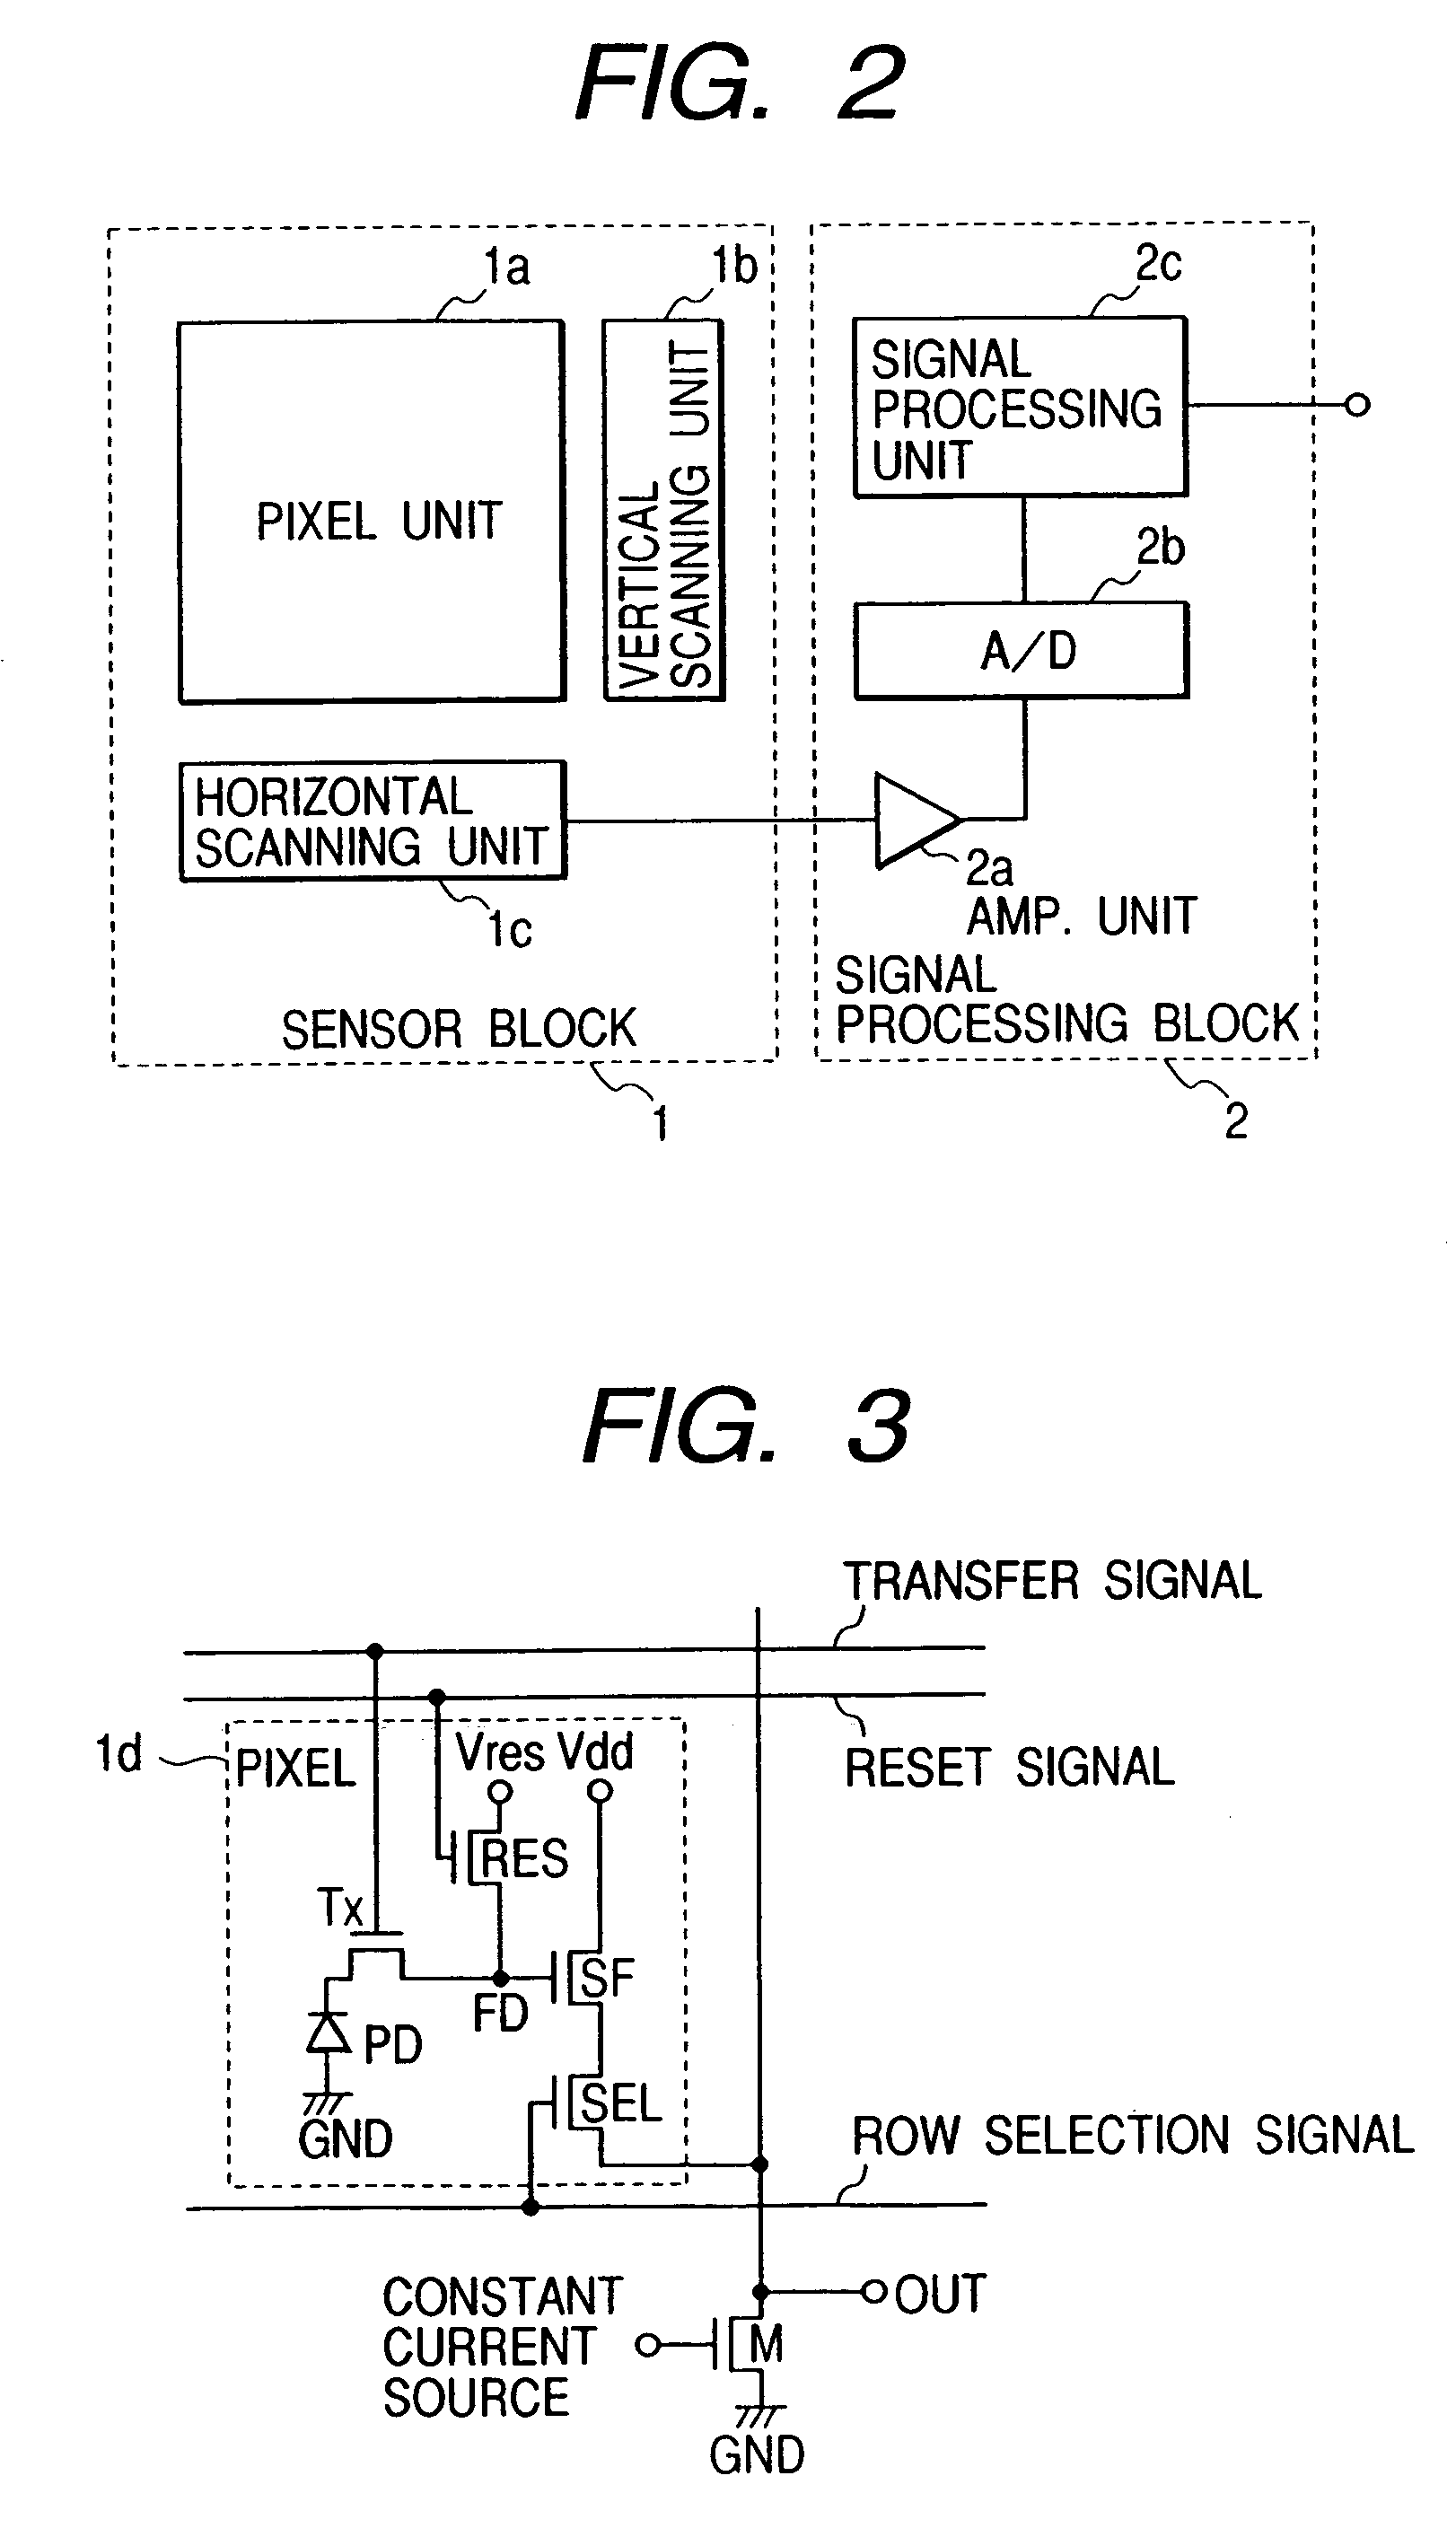 Image sensing apparatus arranged on a single substrate